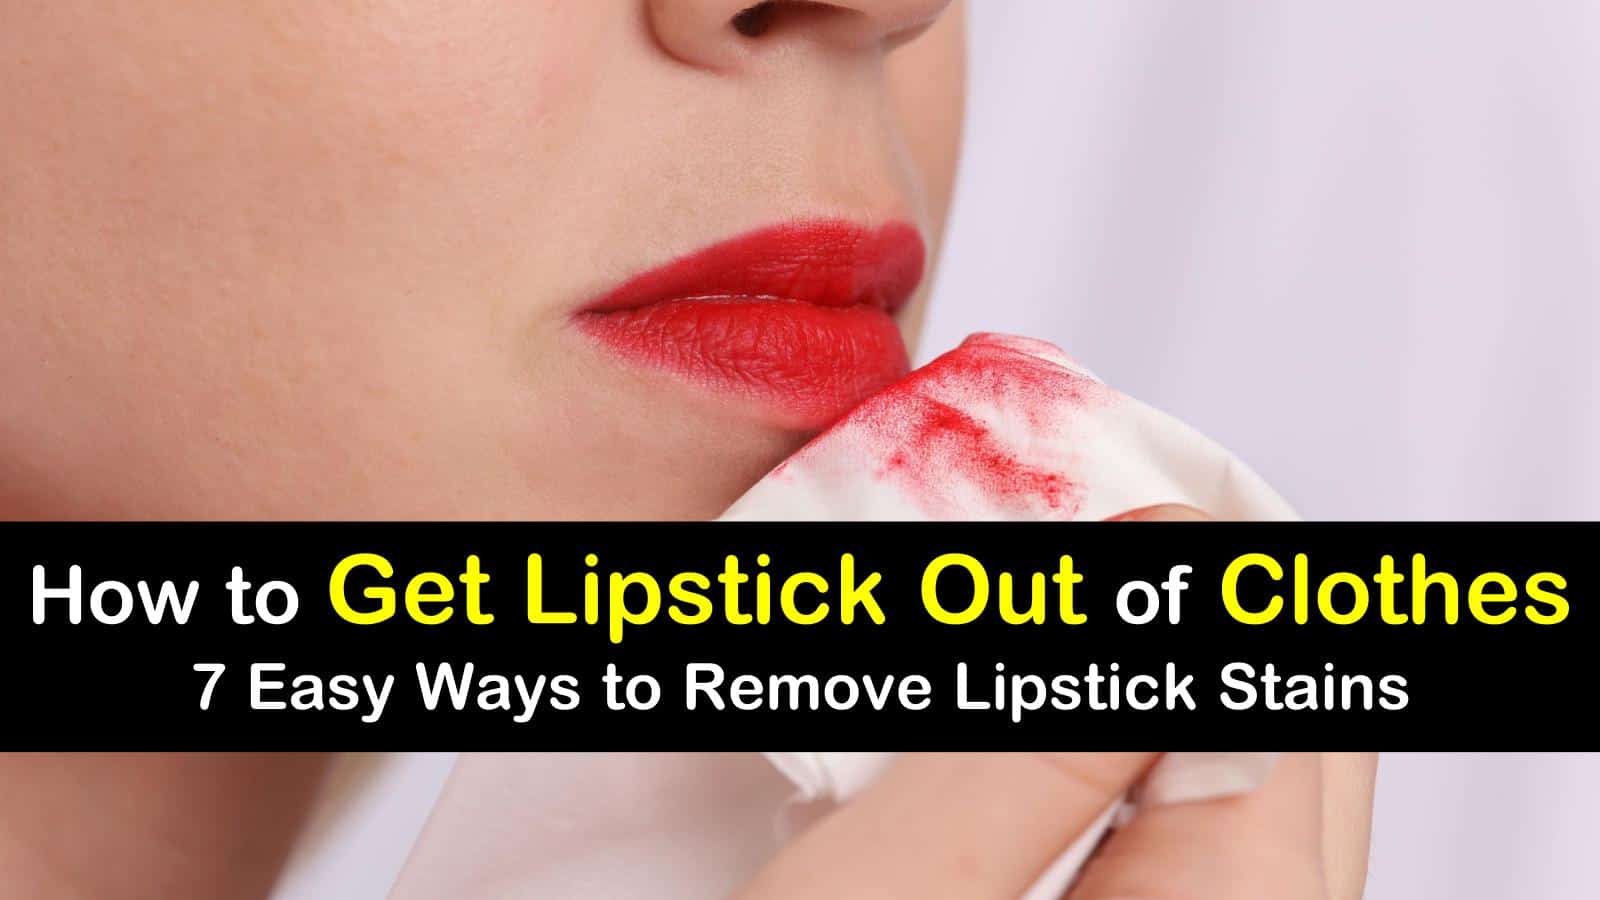 How To Get Lipstick Out Of Clothes 7 Easy Ways To Remove Lipstick Stains,Stainless Steel Gas Grills With Stainless Steel Grates